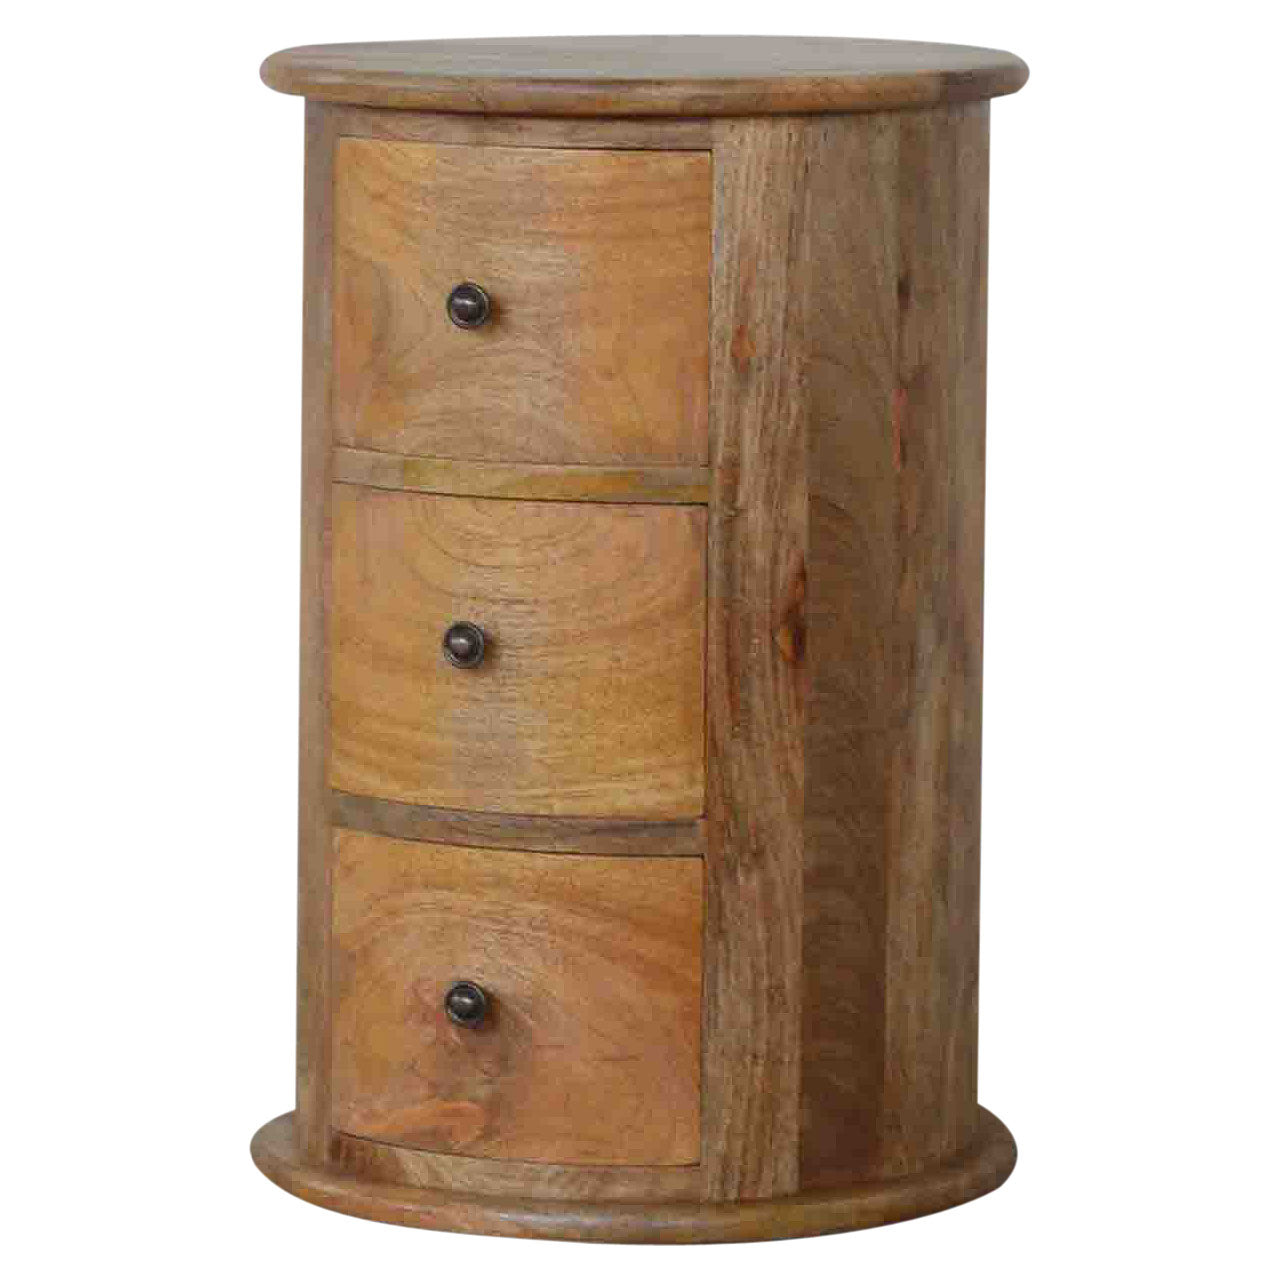 3 Drawer Mango Wood Drum Chest Bedside Drawers